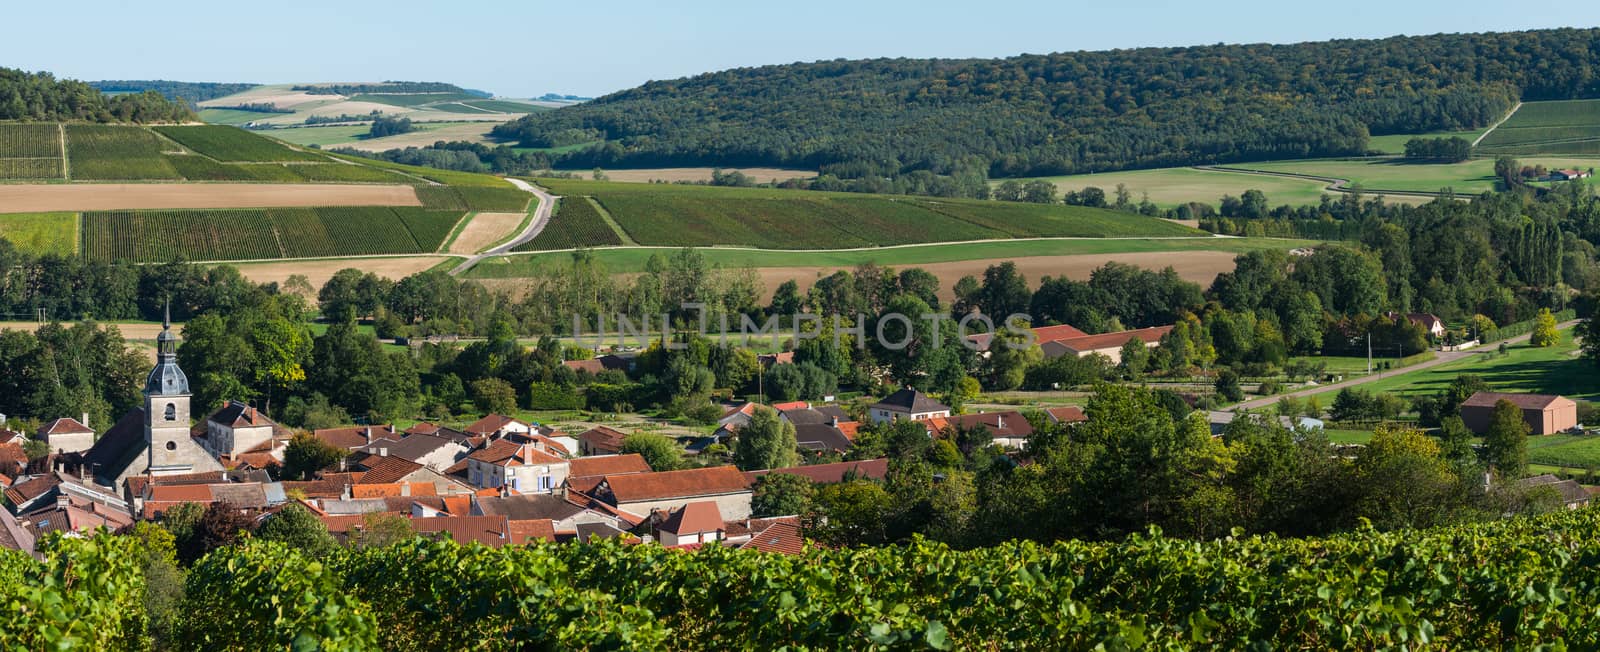 Champagne vineyards in the Cote des Bar area of the Aube department near to Arrentieres, Champagne-Ardennes, France, Europe